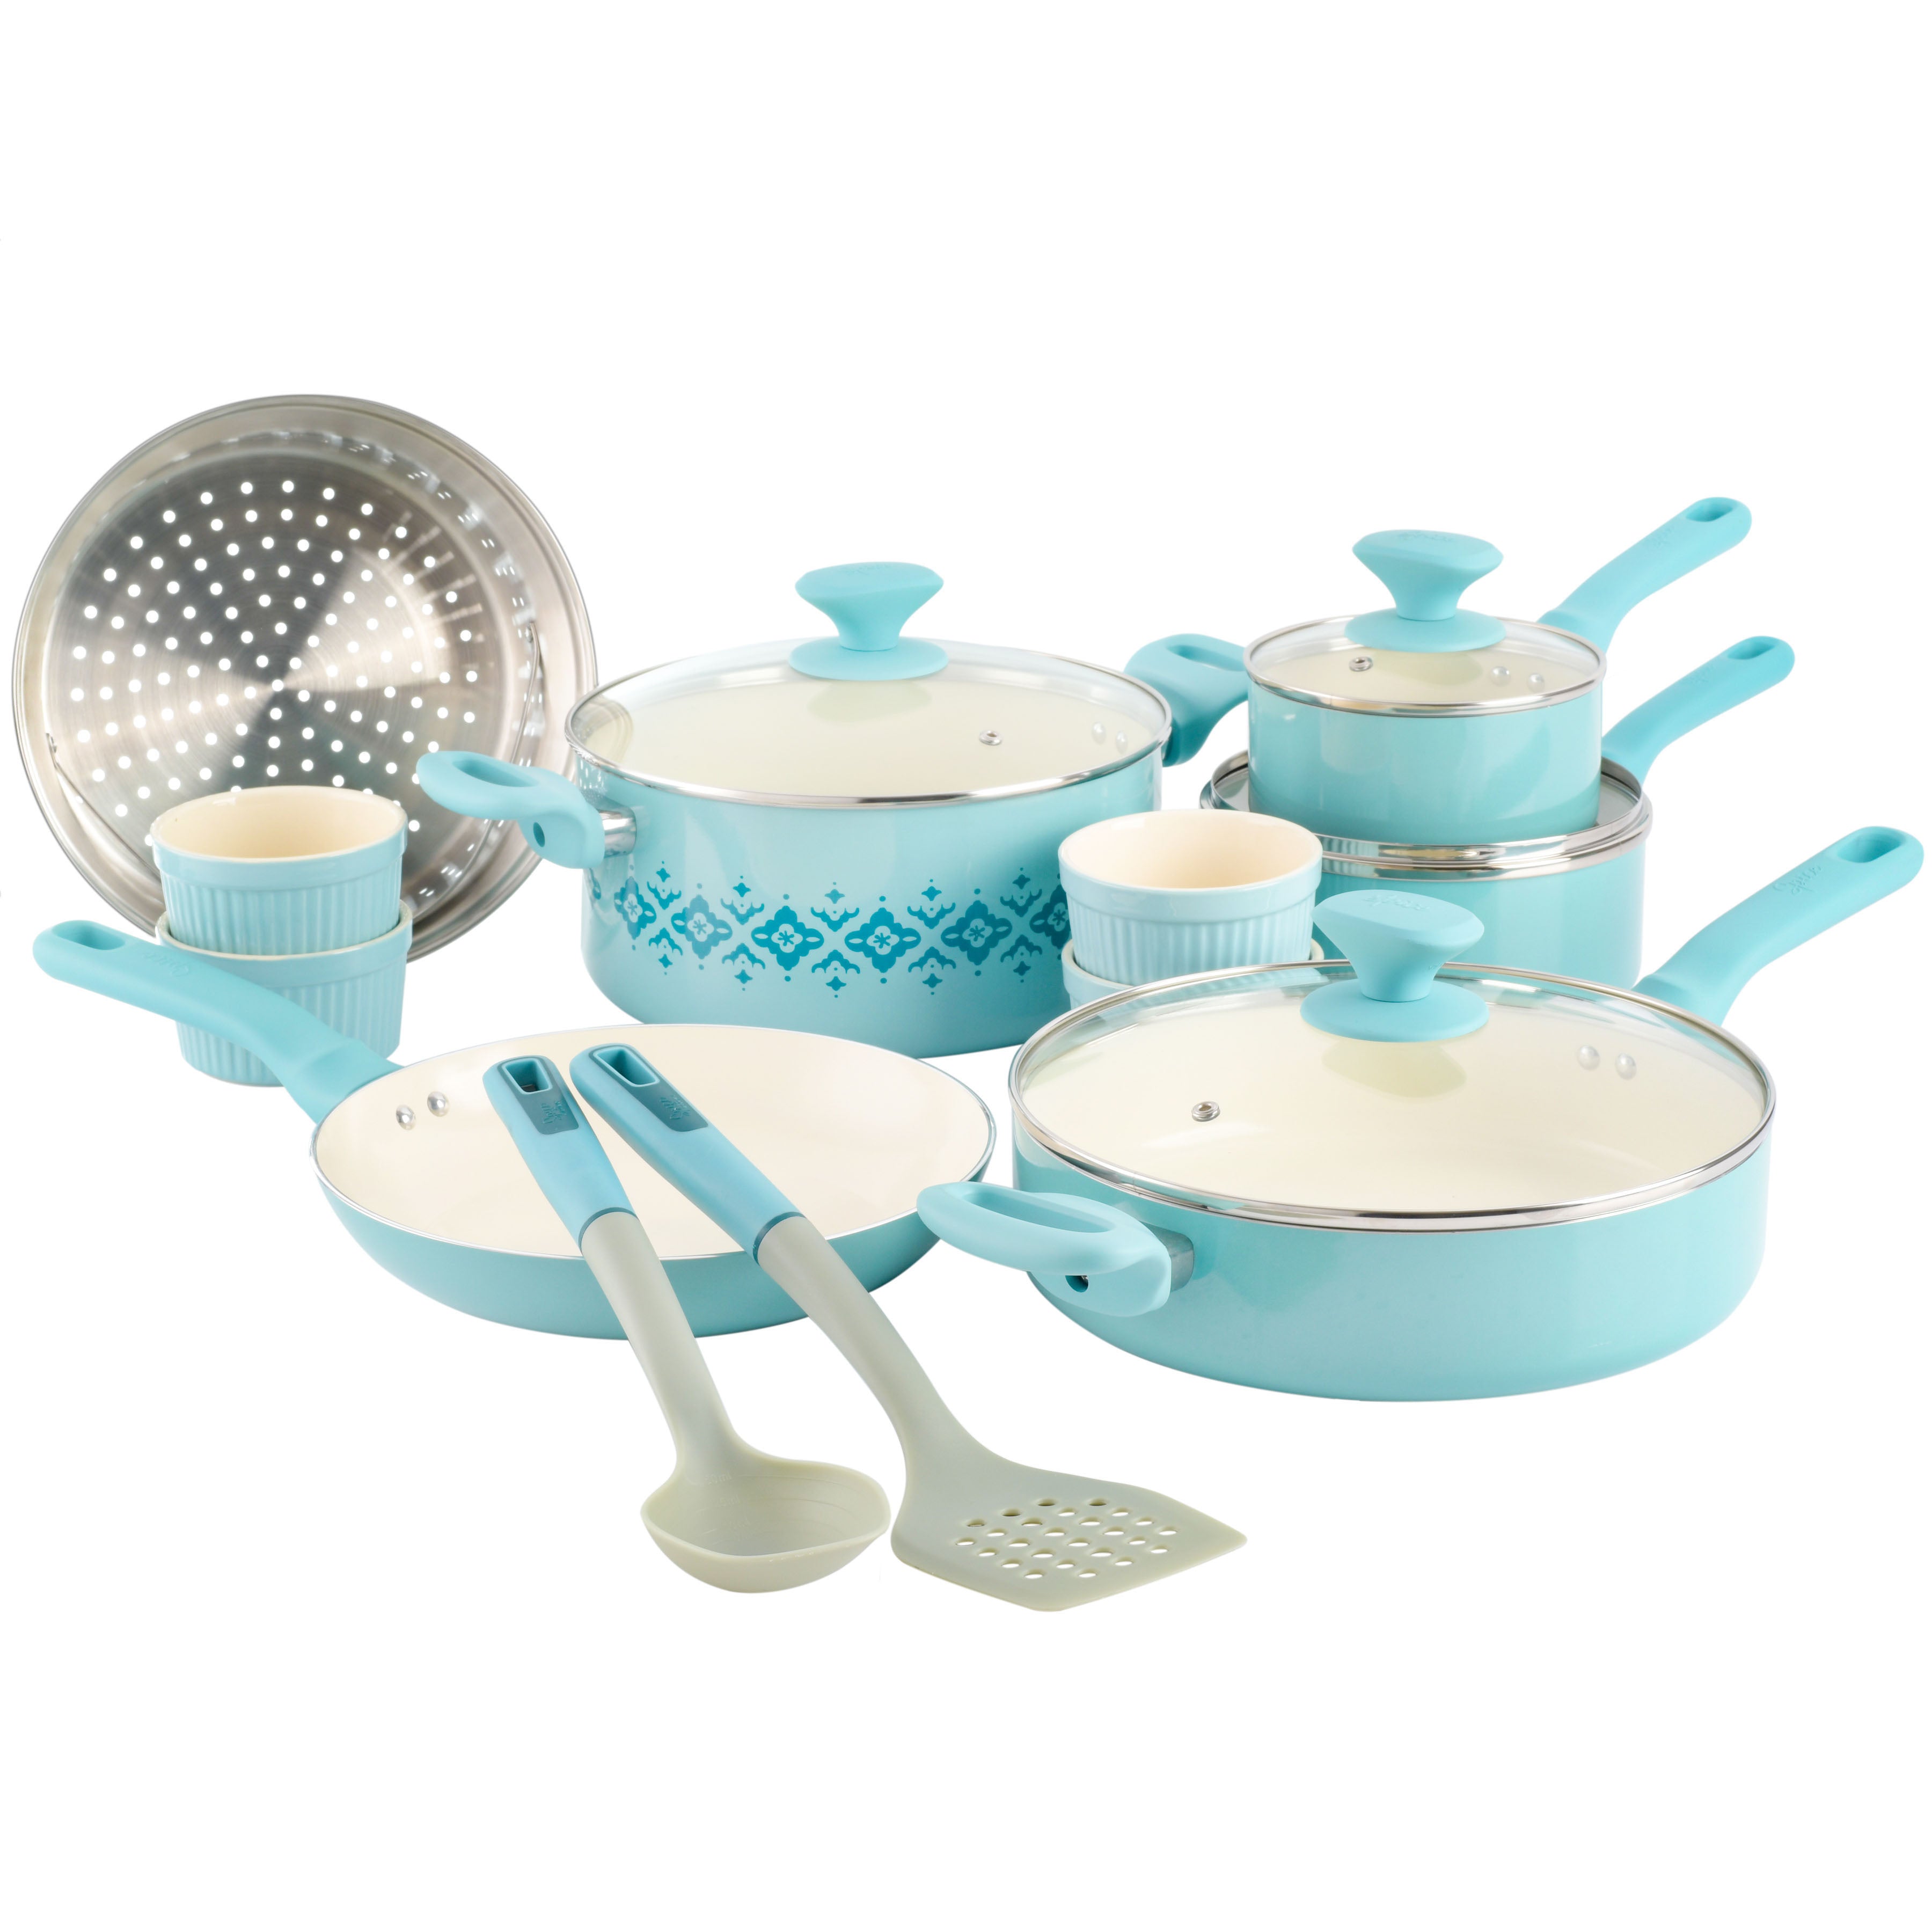 Spice by Tia Mowry 10-Piece Healthy Non-Stick Ceramic Cookware Set - Teal